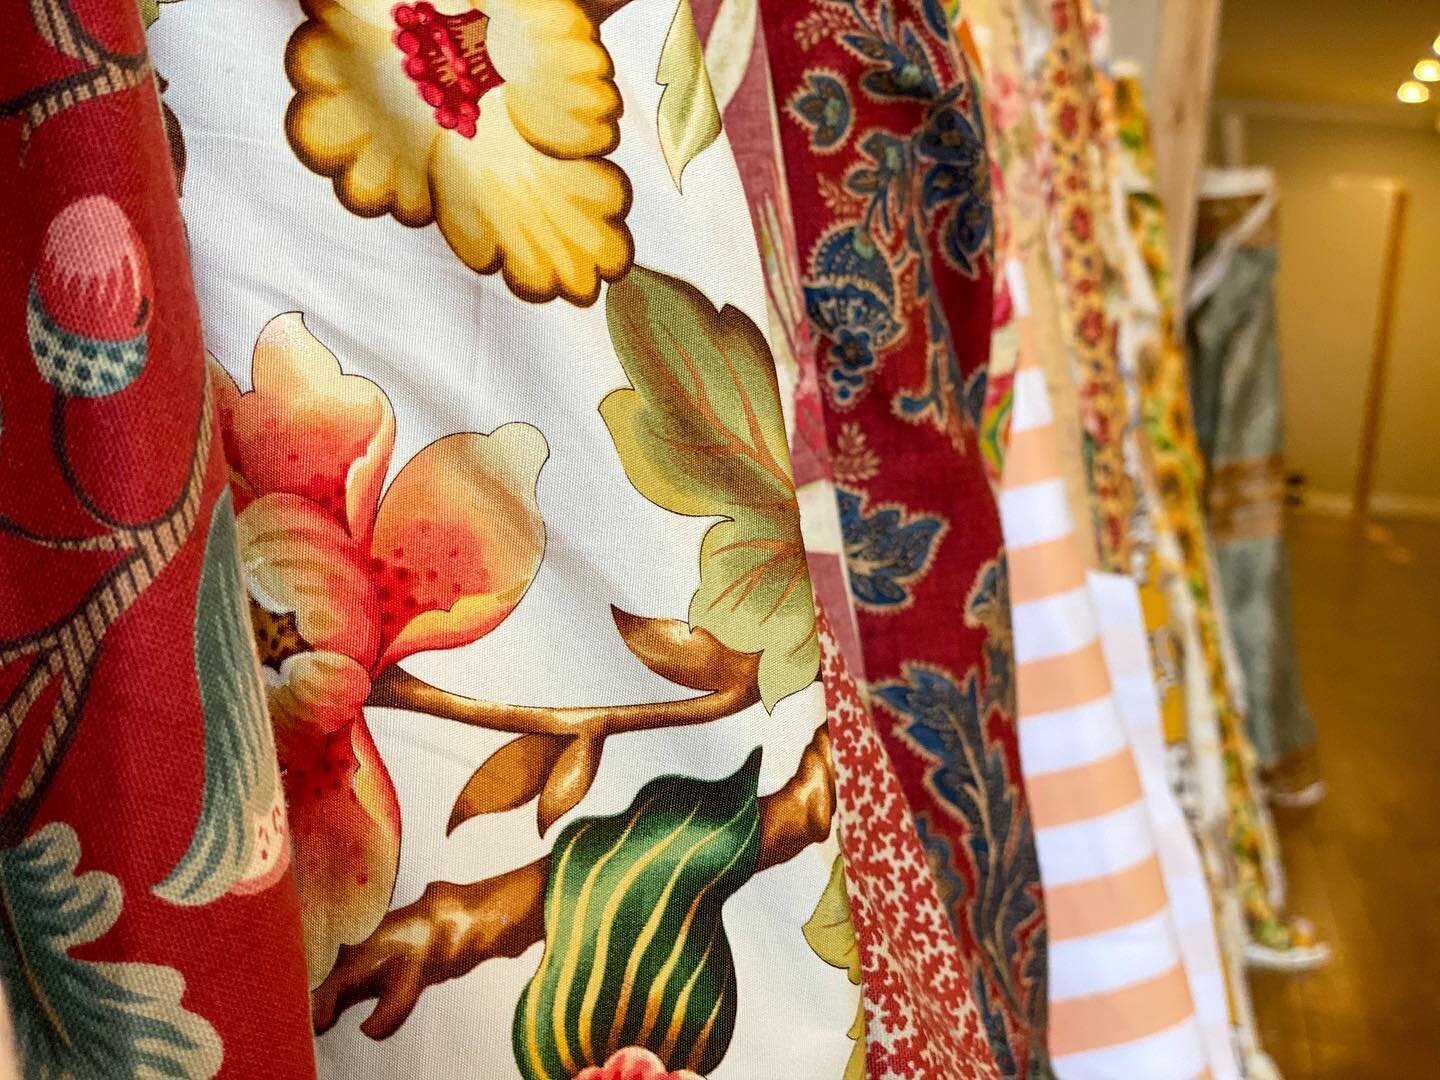 The Sale will be open today and all weekend! Stop by to see our huge selection of fabrics all $20 a yard! Thousands of yards in stock from sheets to prints. Stop by to find something great!